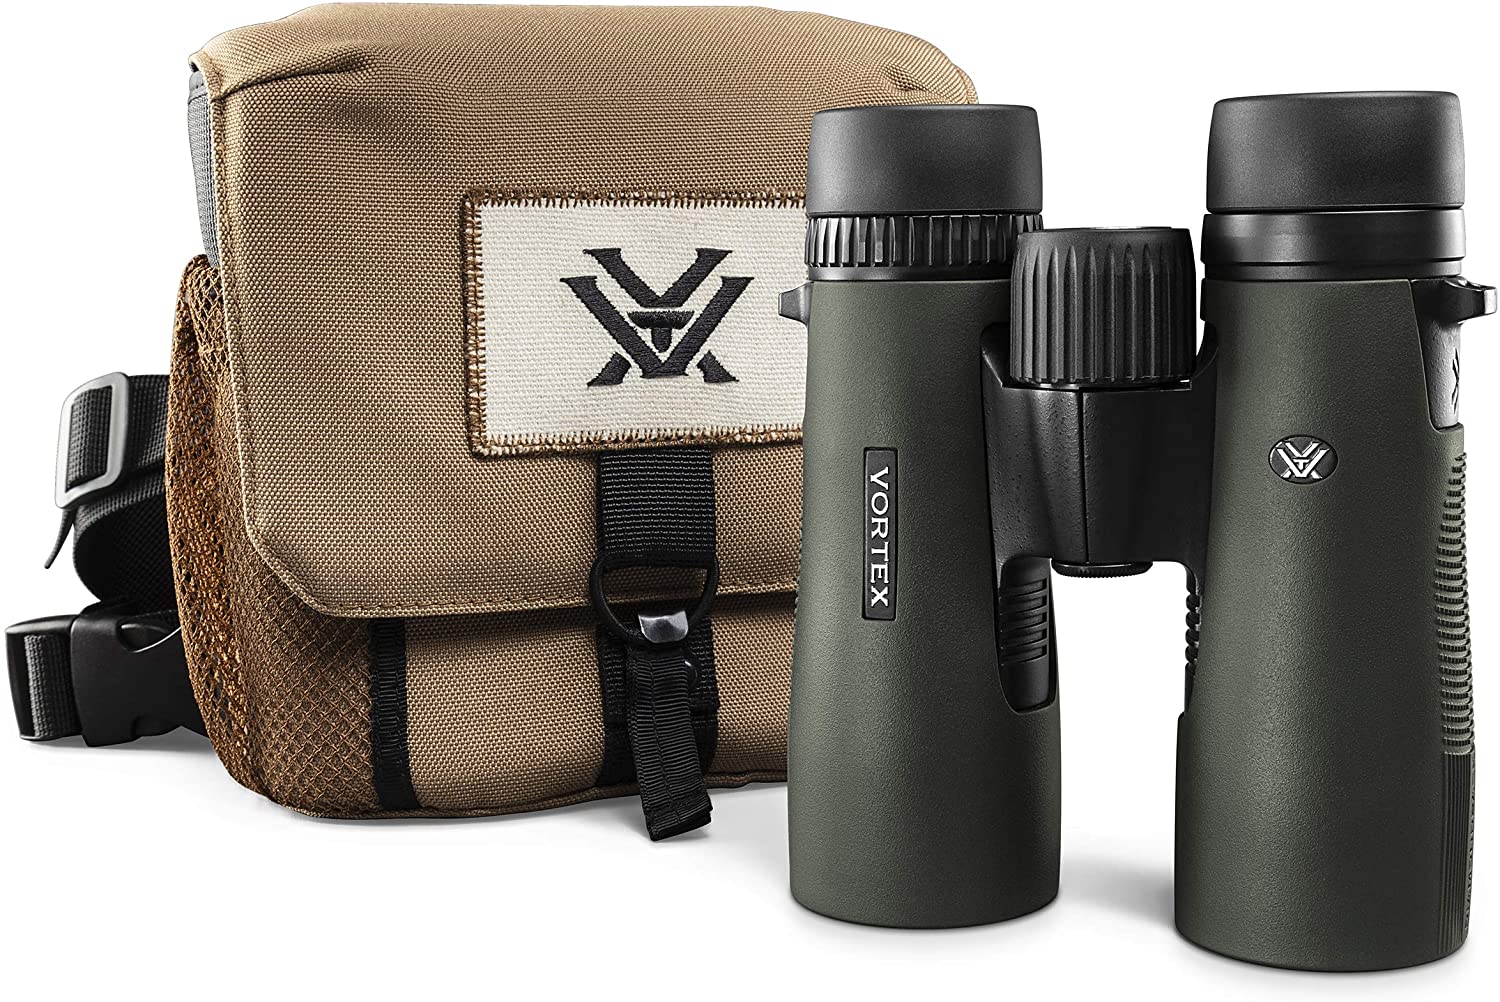 Where Are Vortex Binoculars Made? - What You Need to Know! - Optics Mag